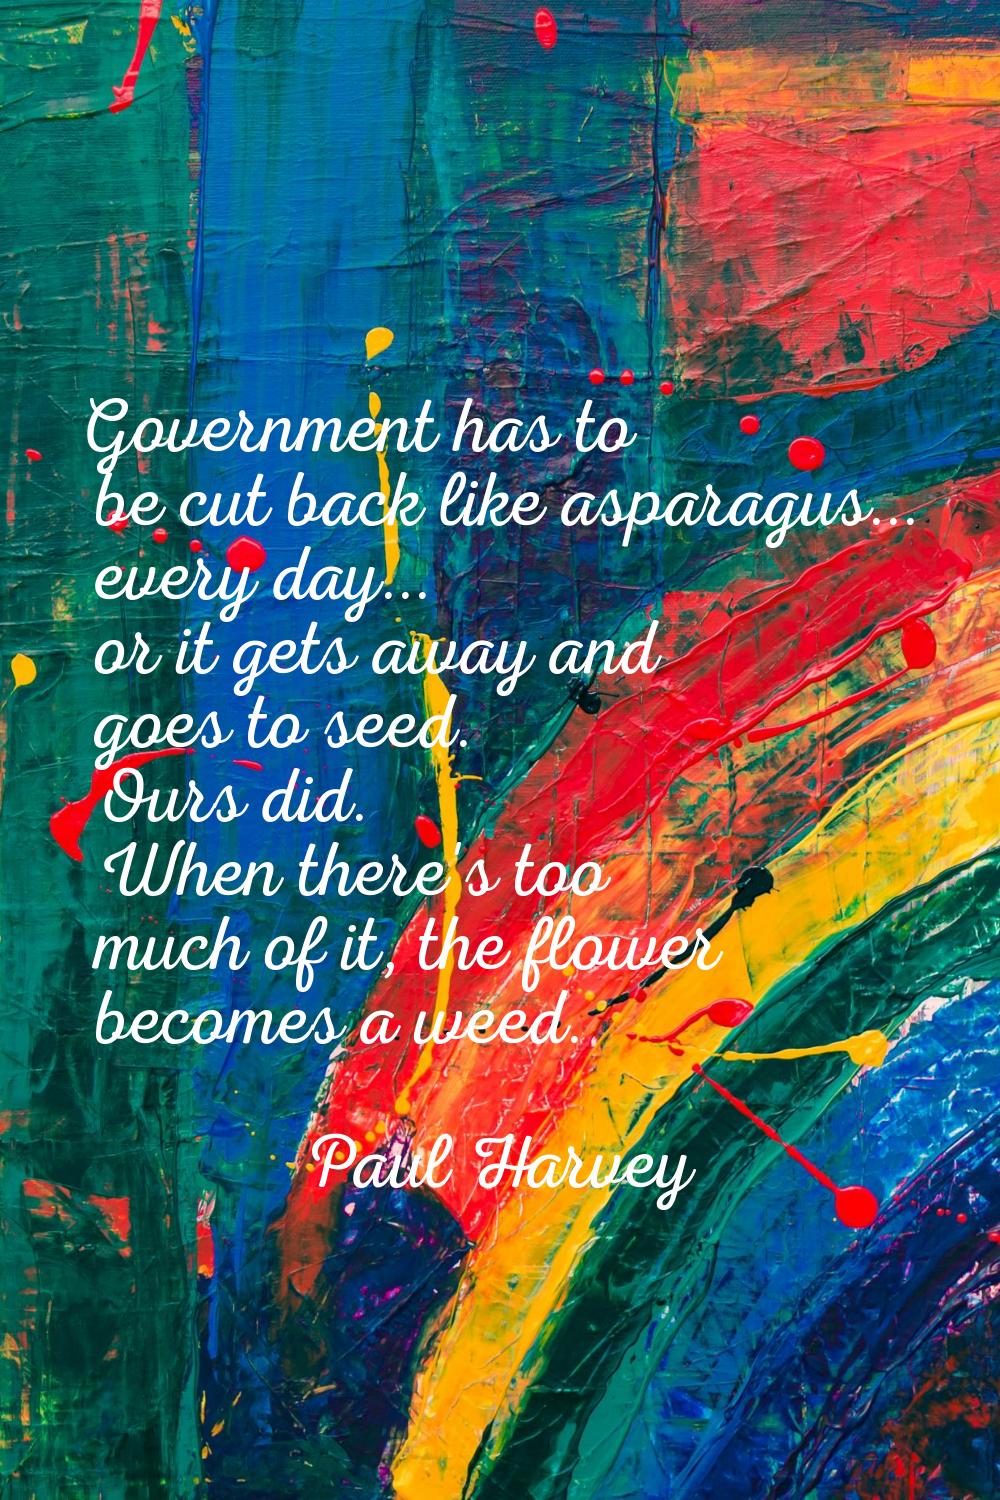 Government has to be cut back like asparagus... every day... or it gets away and goes to seed. Ours